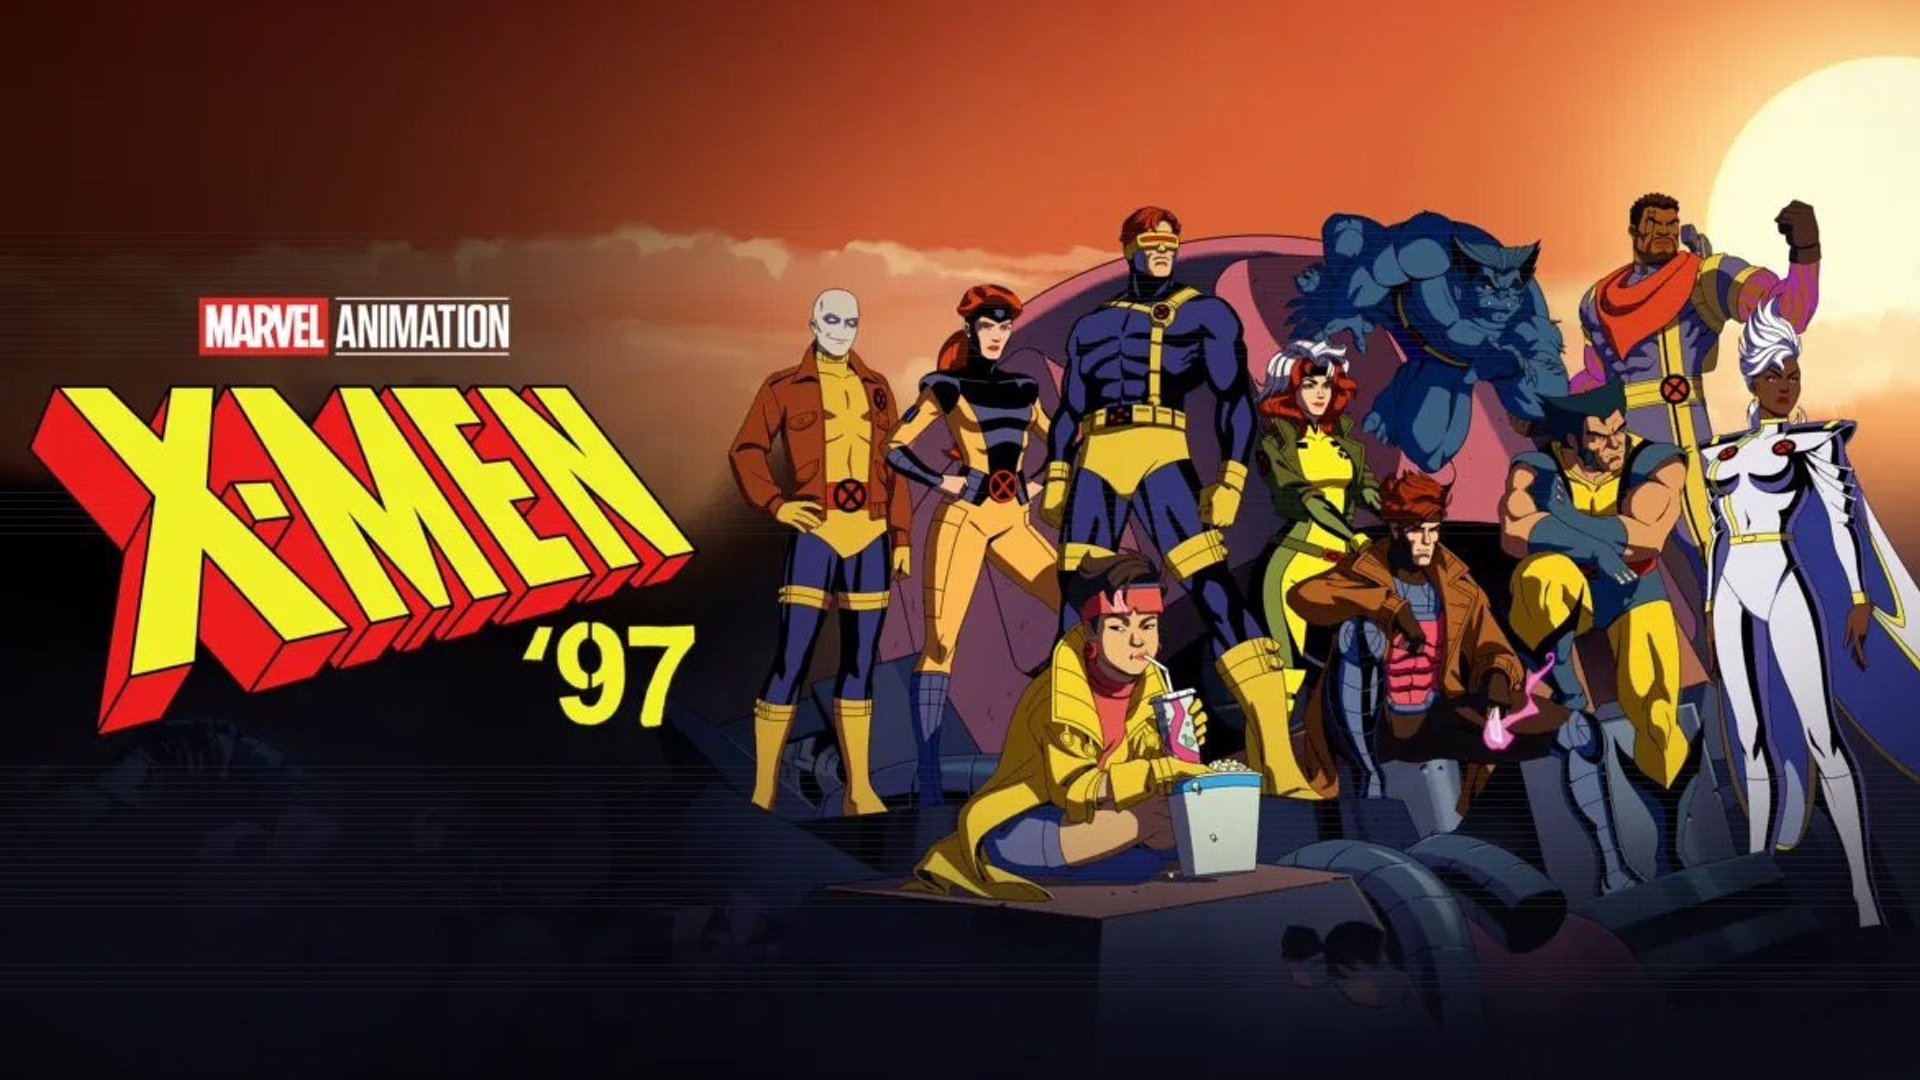 x-men-97-is-a-standalone-marvel-enigma-unraveling-in-nostalgic-hues.jpg